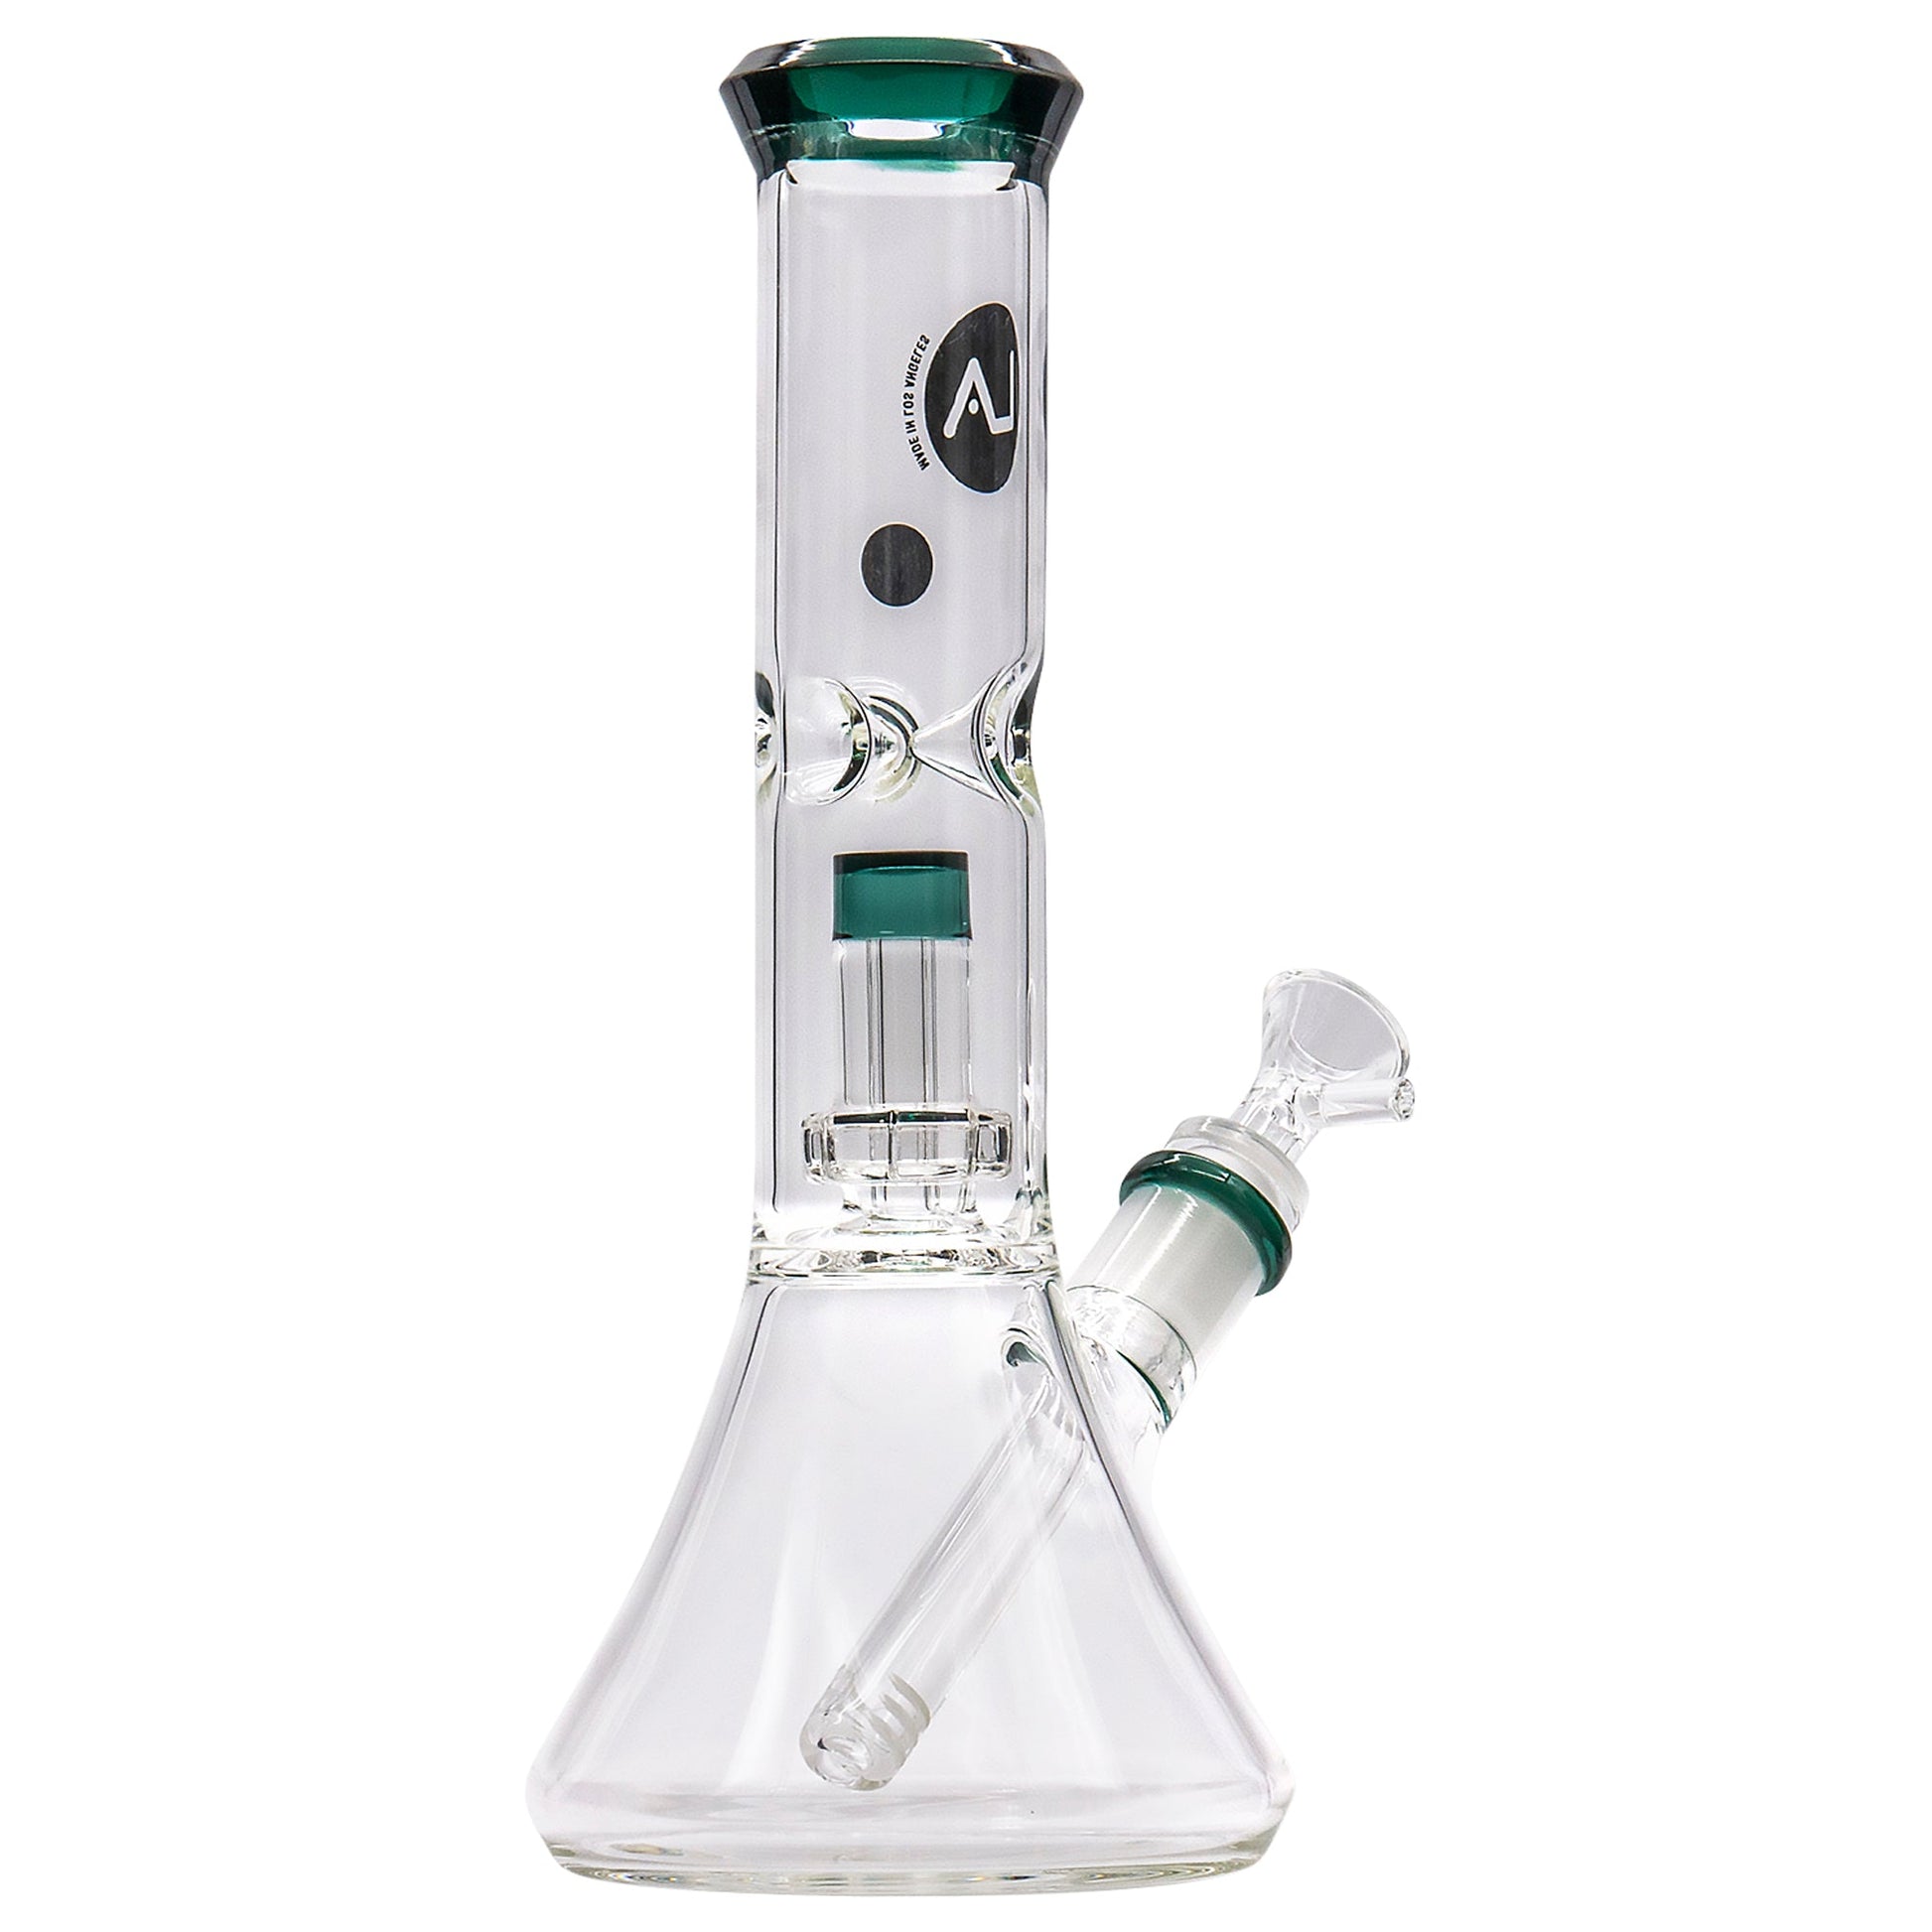 LA Pipes 11” Color Accented Showerhead Perc Beaker Bong by LA Pipes | Mission Dispensary